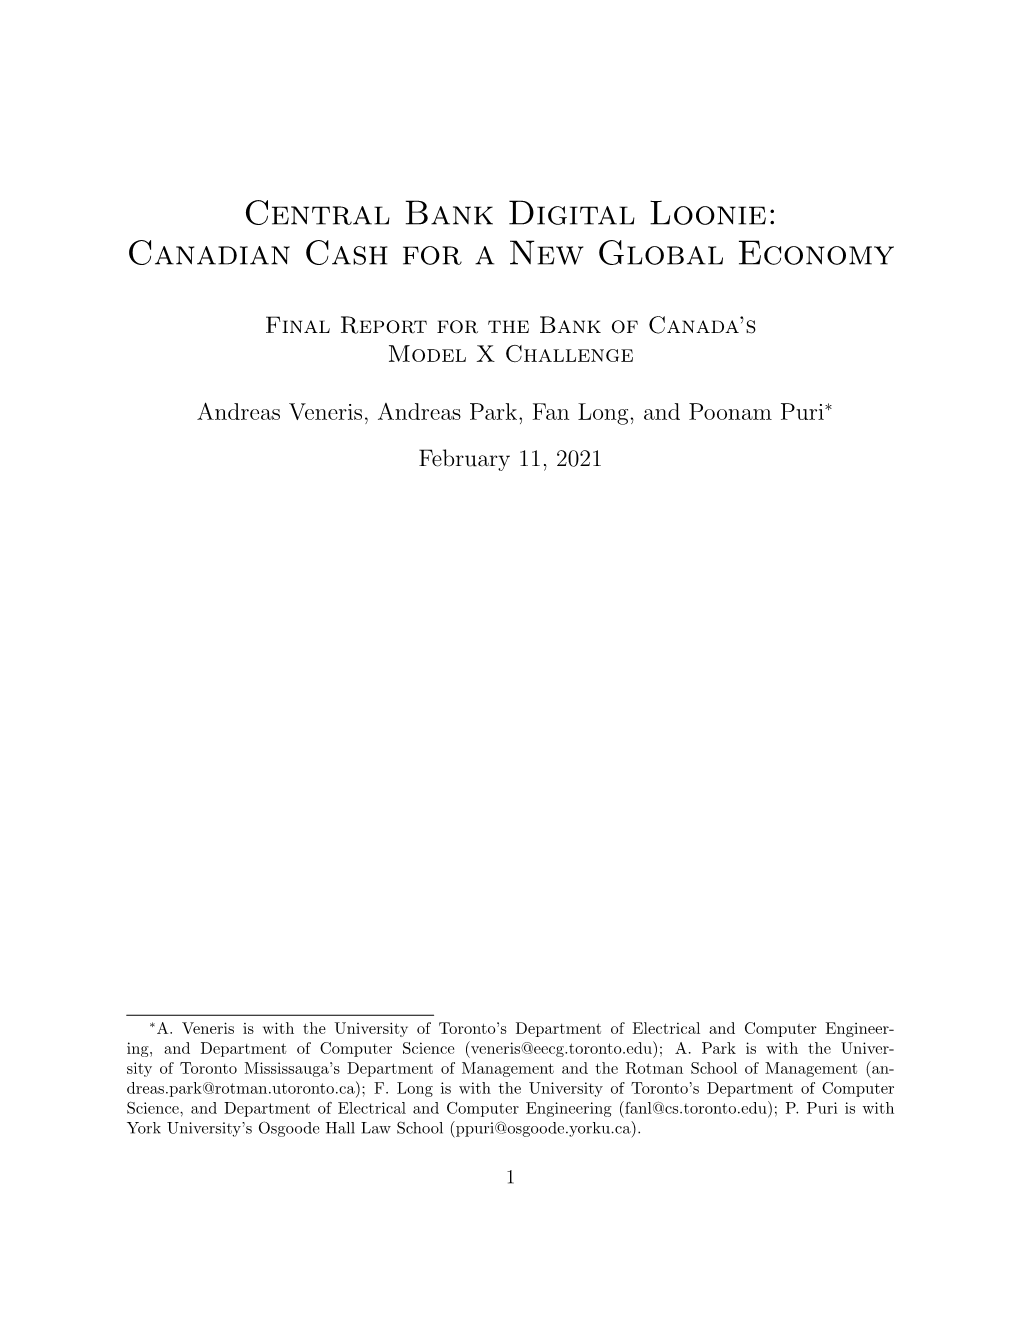 Central Bank Digital Loonie: Canadian Cash for a New Global Economy